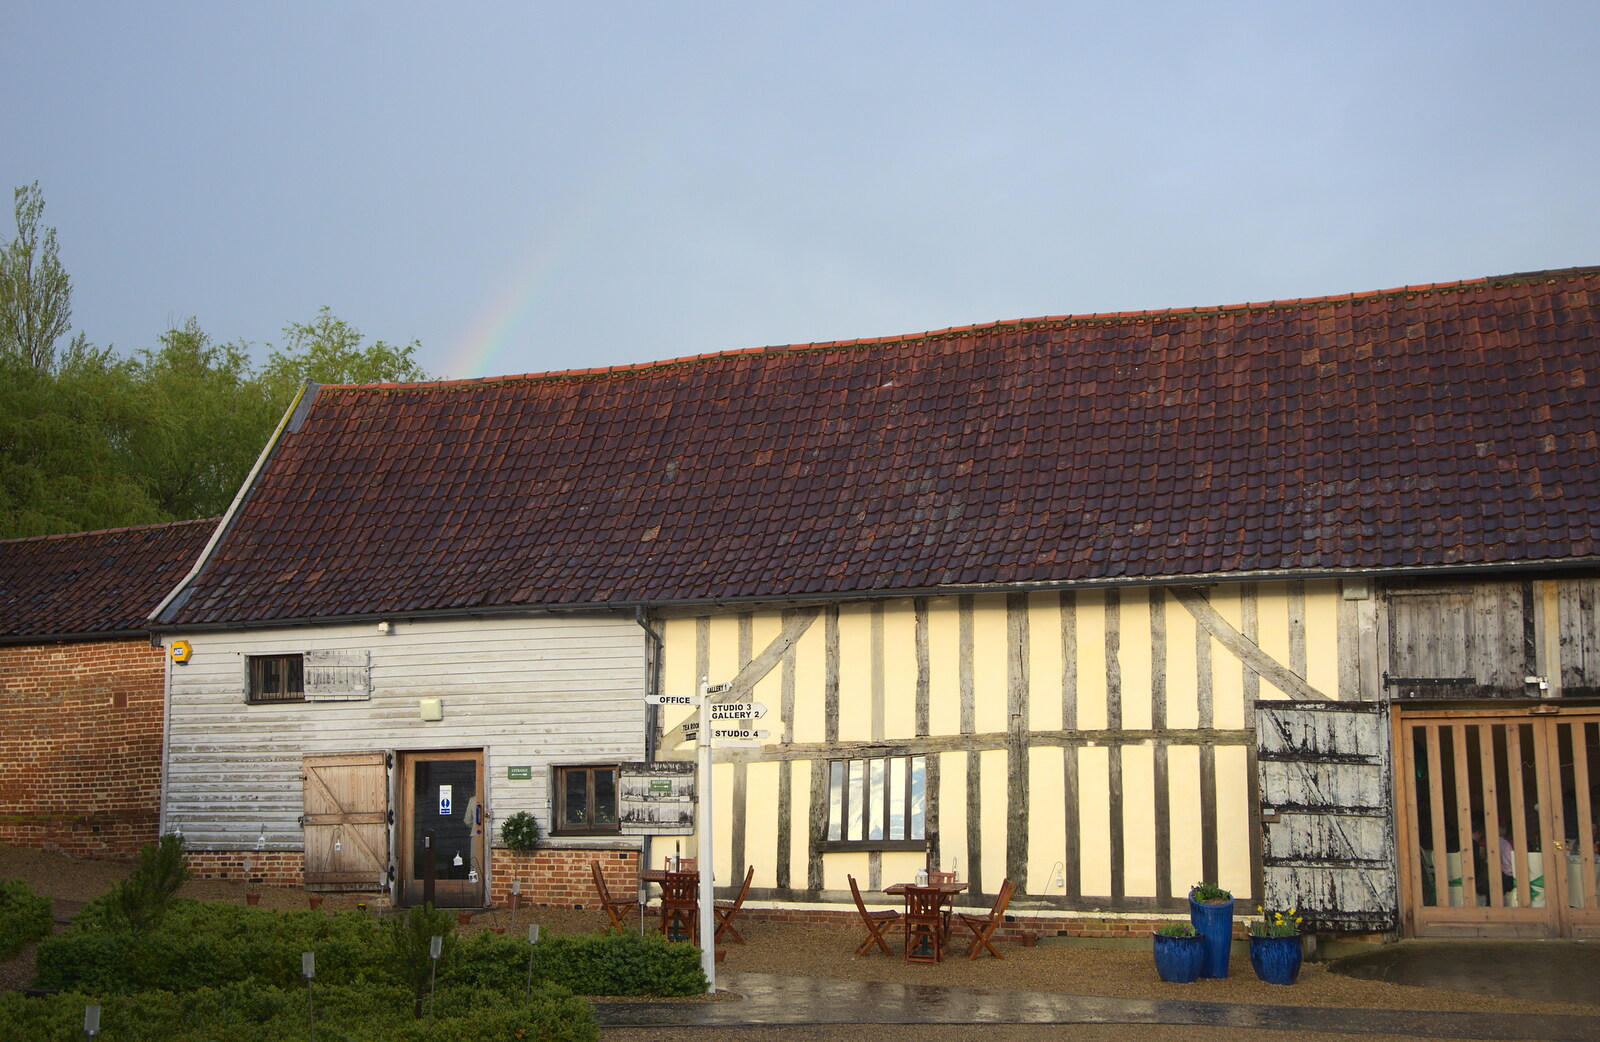 A faint rainbow over the barn from The BBs at Wingfield, and More Garage Destruction, Suffolk and London - 11th May 2013